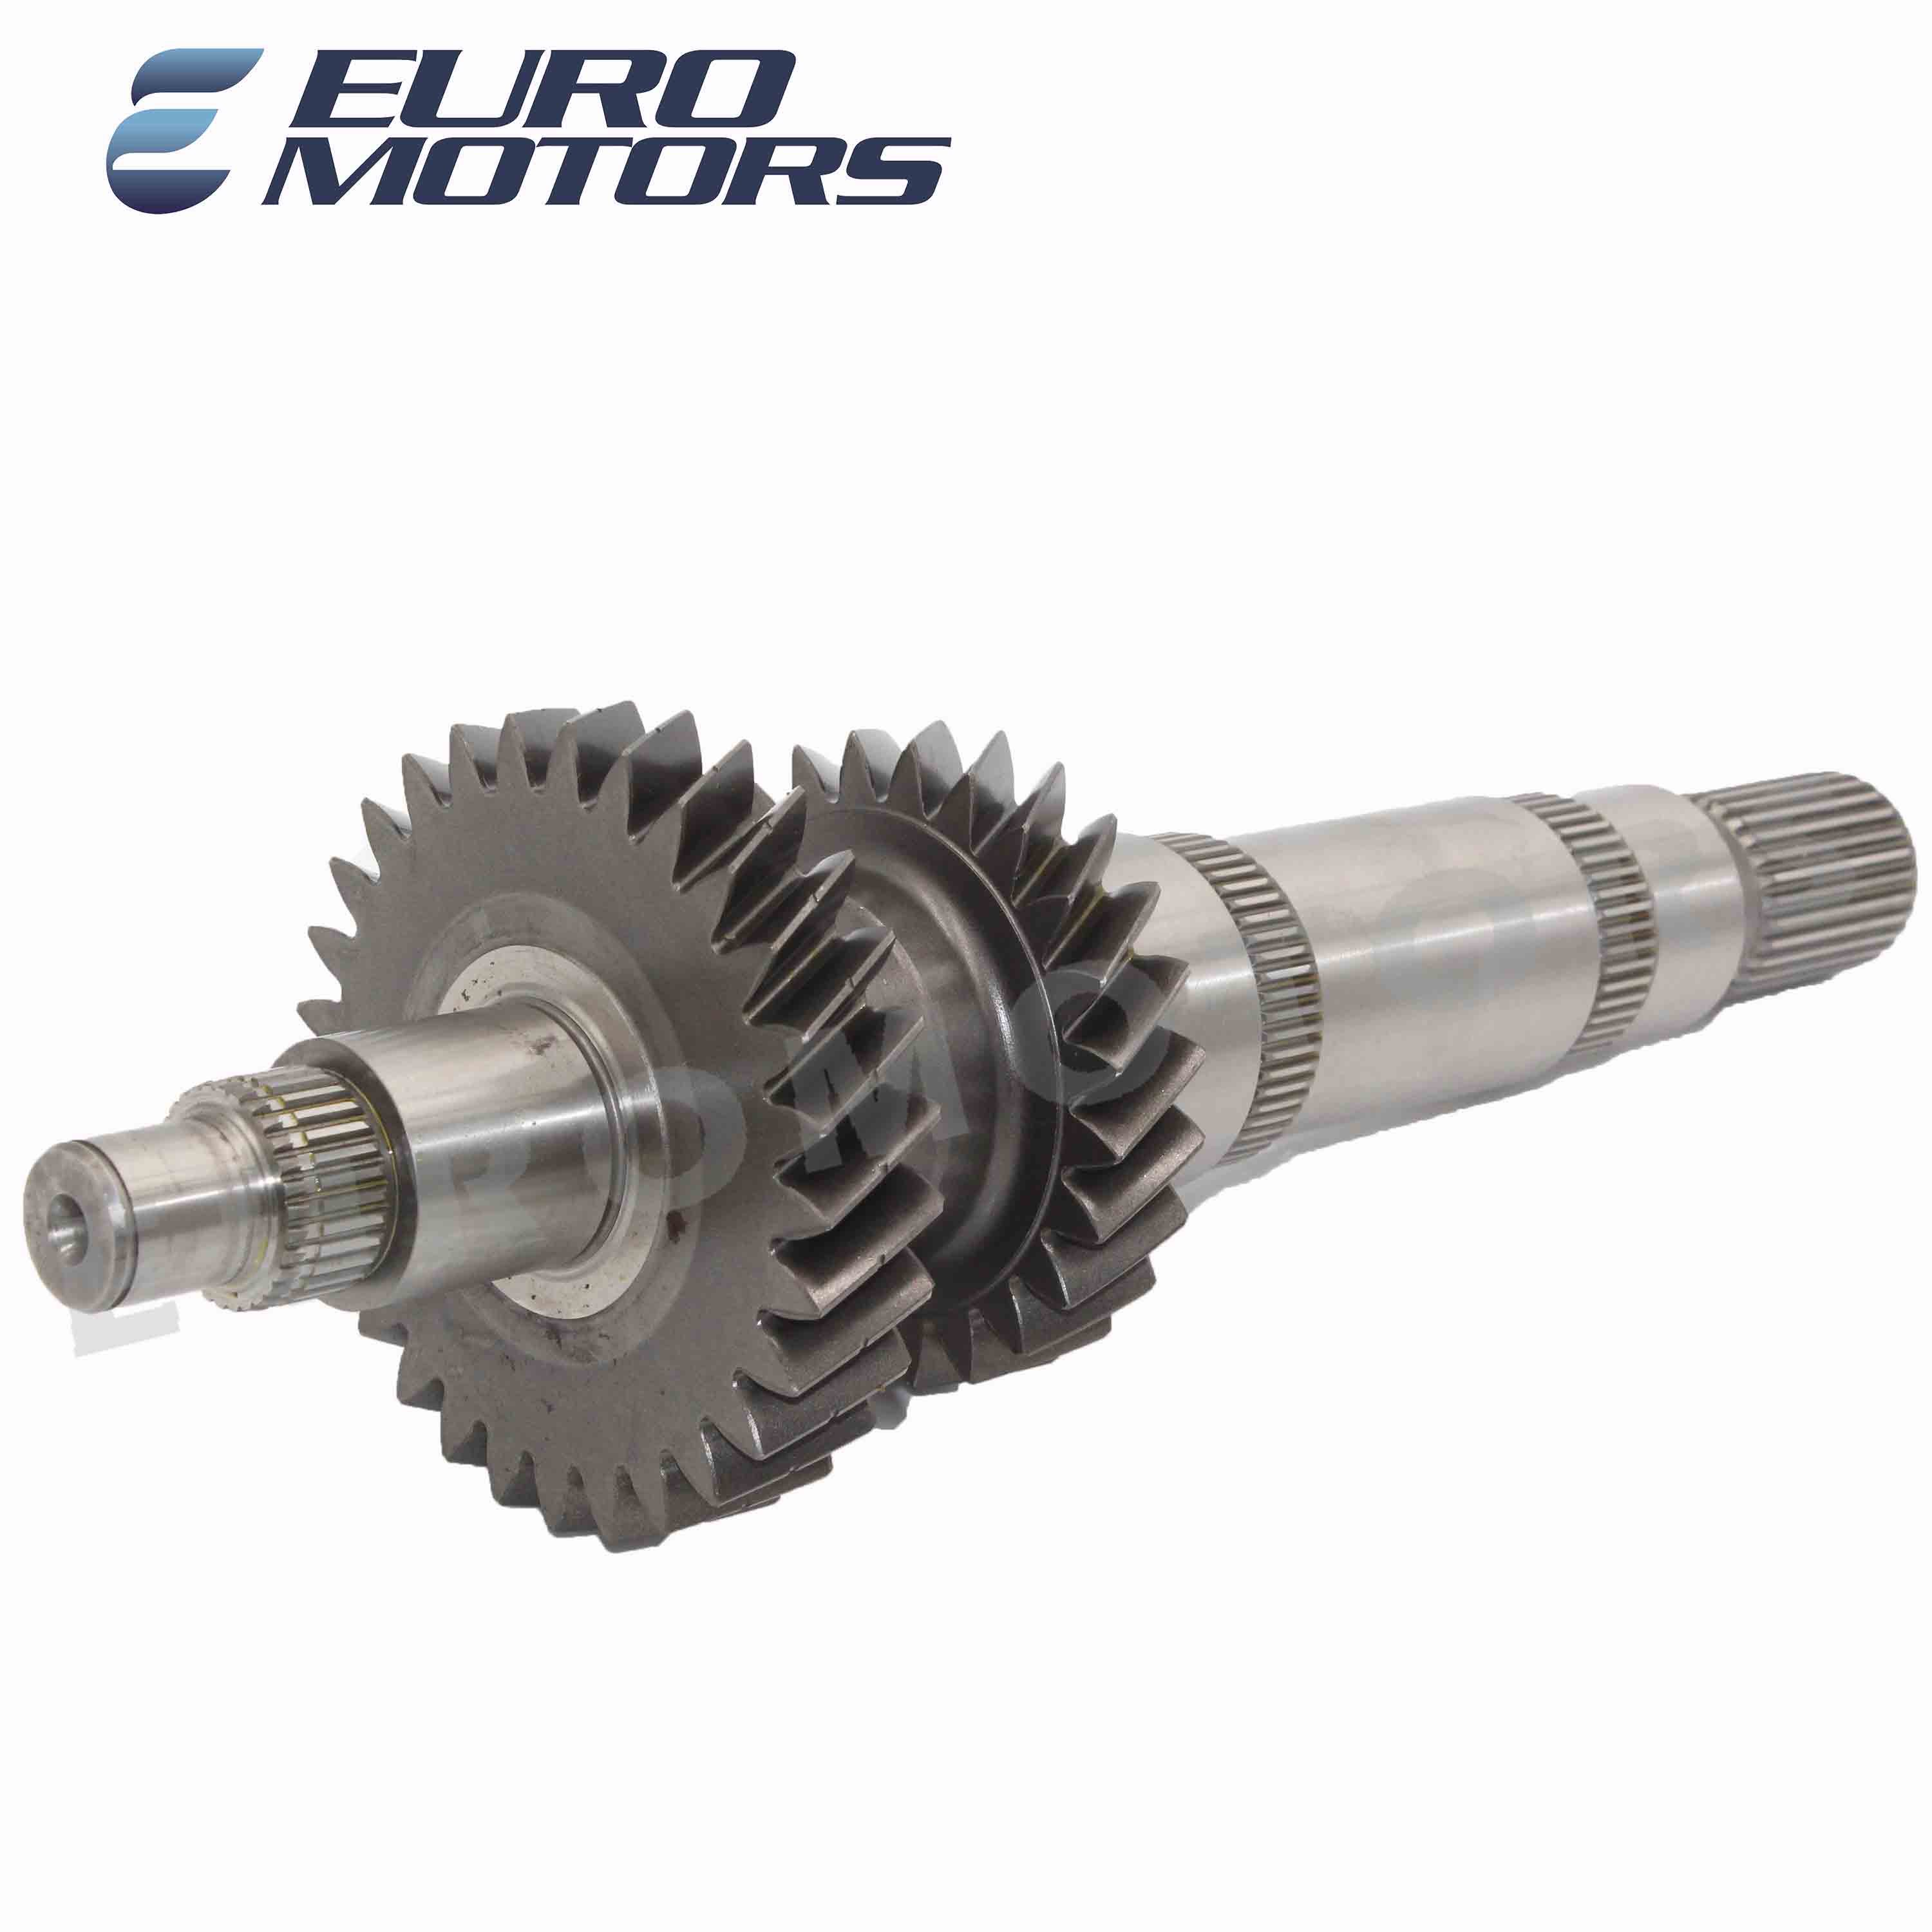 Transmission gearbox